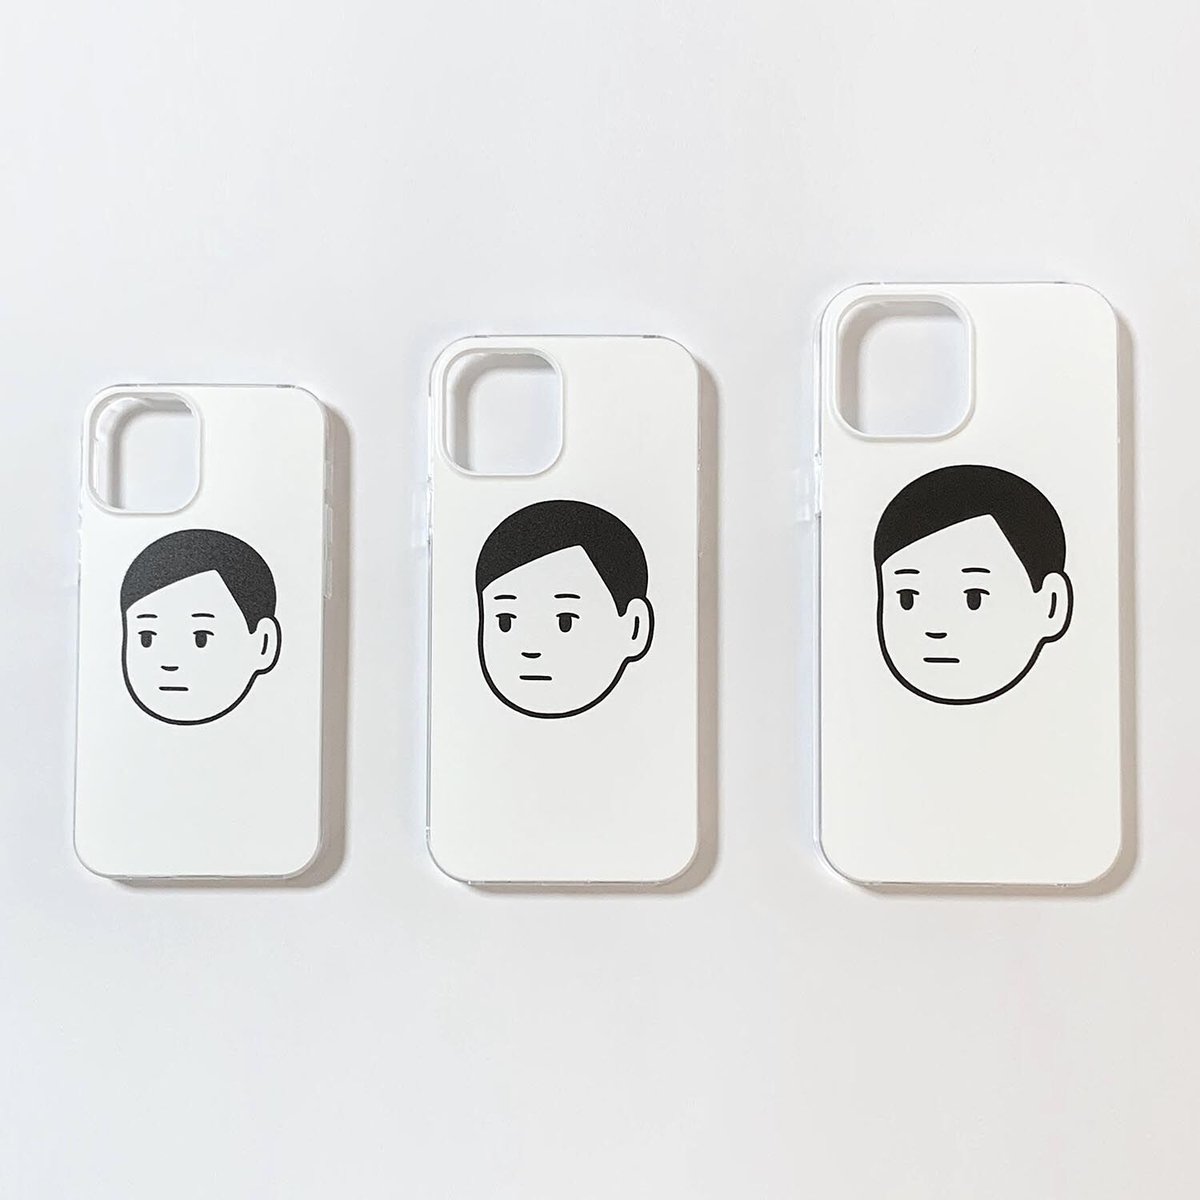 INSIGHT BOY (iPhone case) | N store